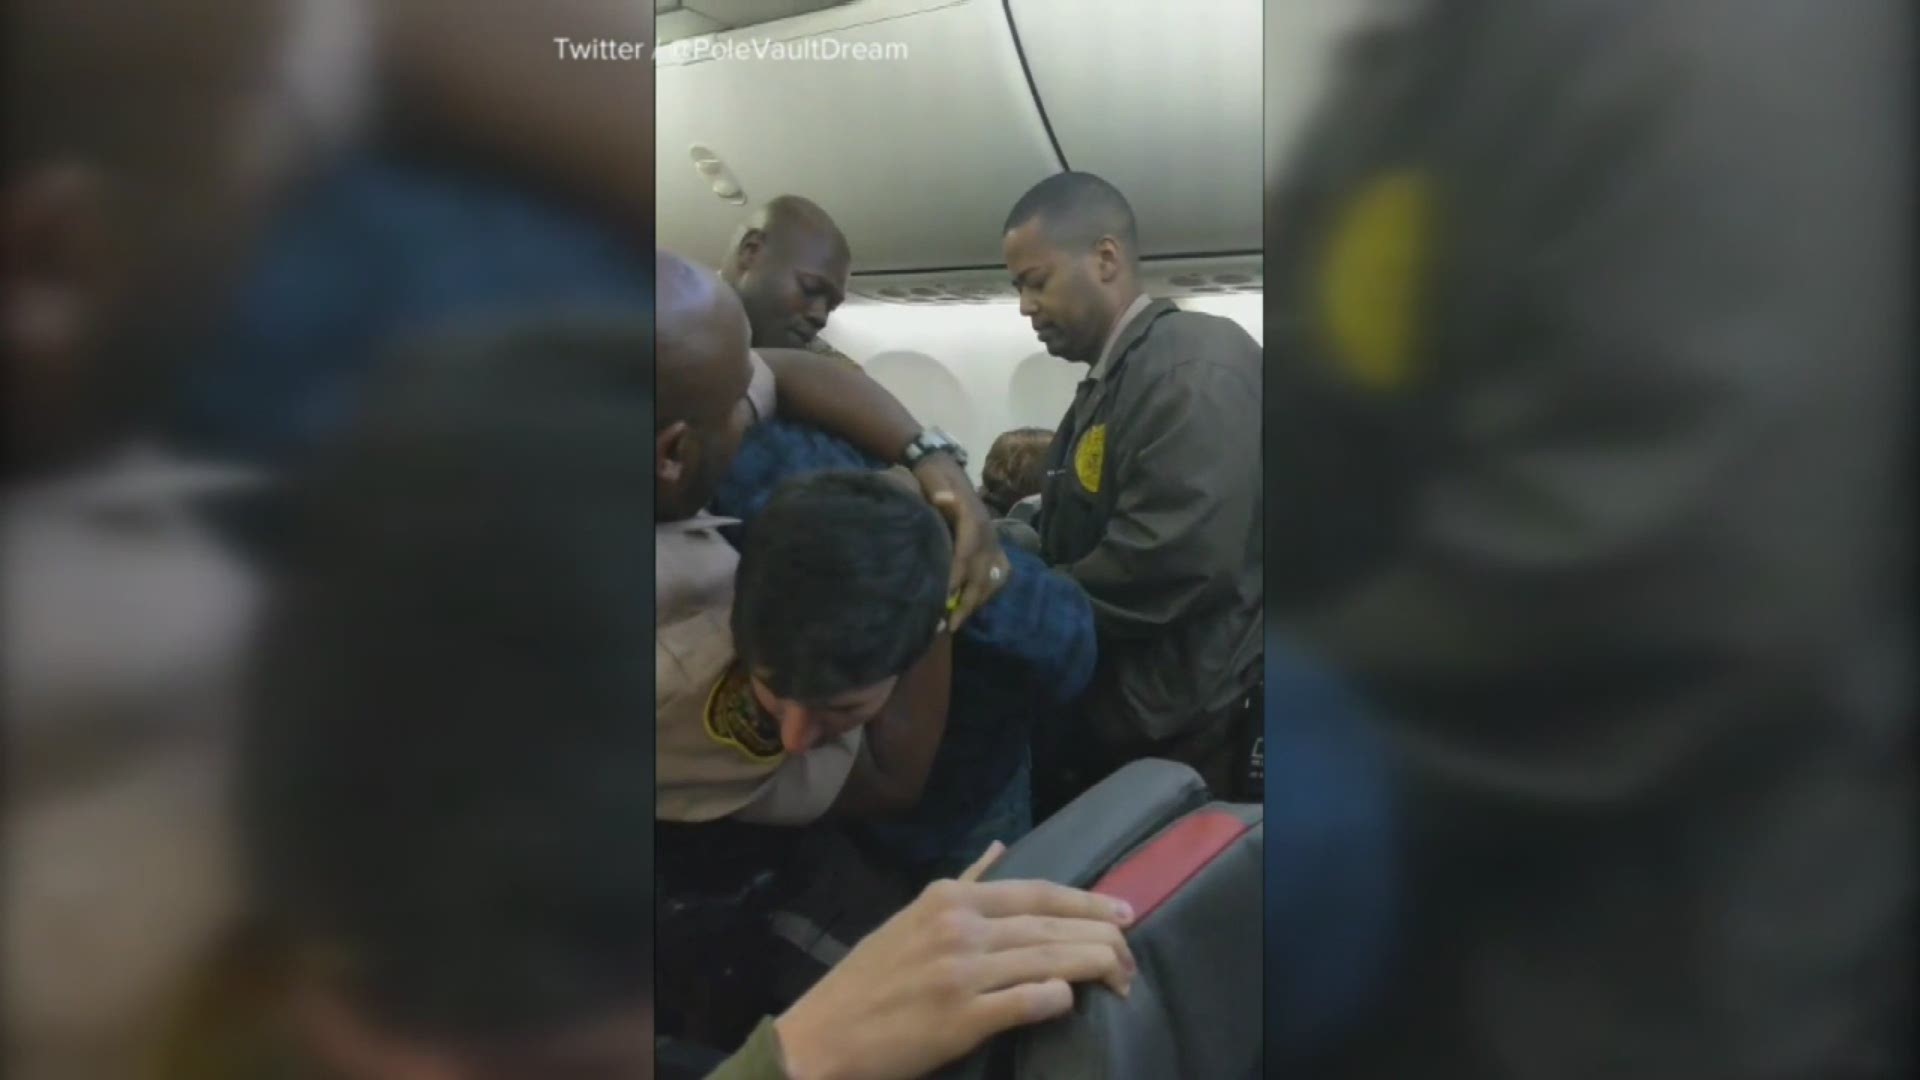 A Miami-Dade police report says the flight crew told officers they tried to move 28-year-old Jacob Garcia of Chicago to another seat, but he continued to be unruly, screaming and insulting the woman and her boyfriend. CREDIT: Twitter / @PoleVaultDream